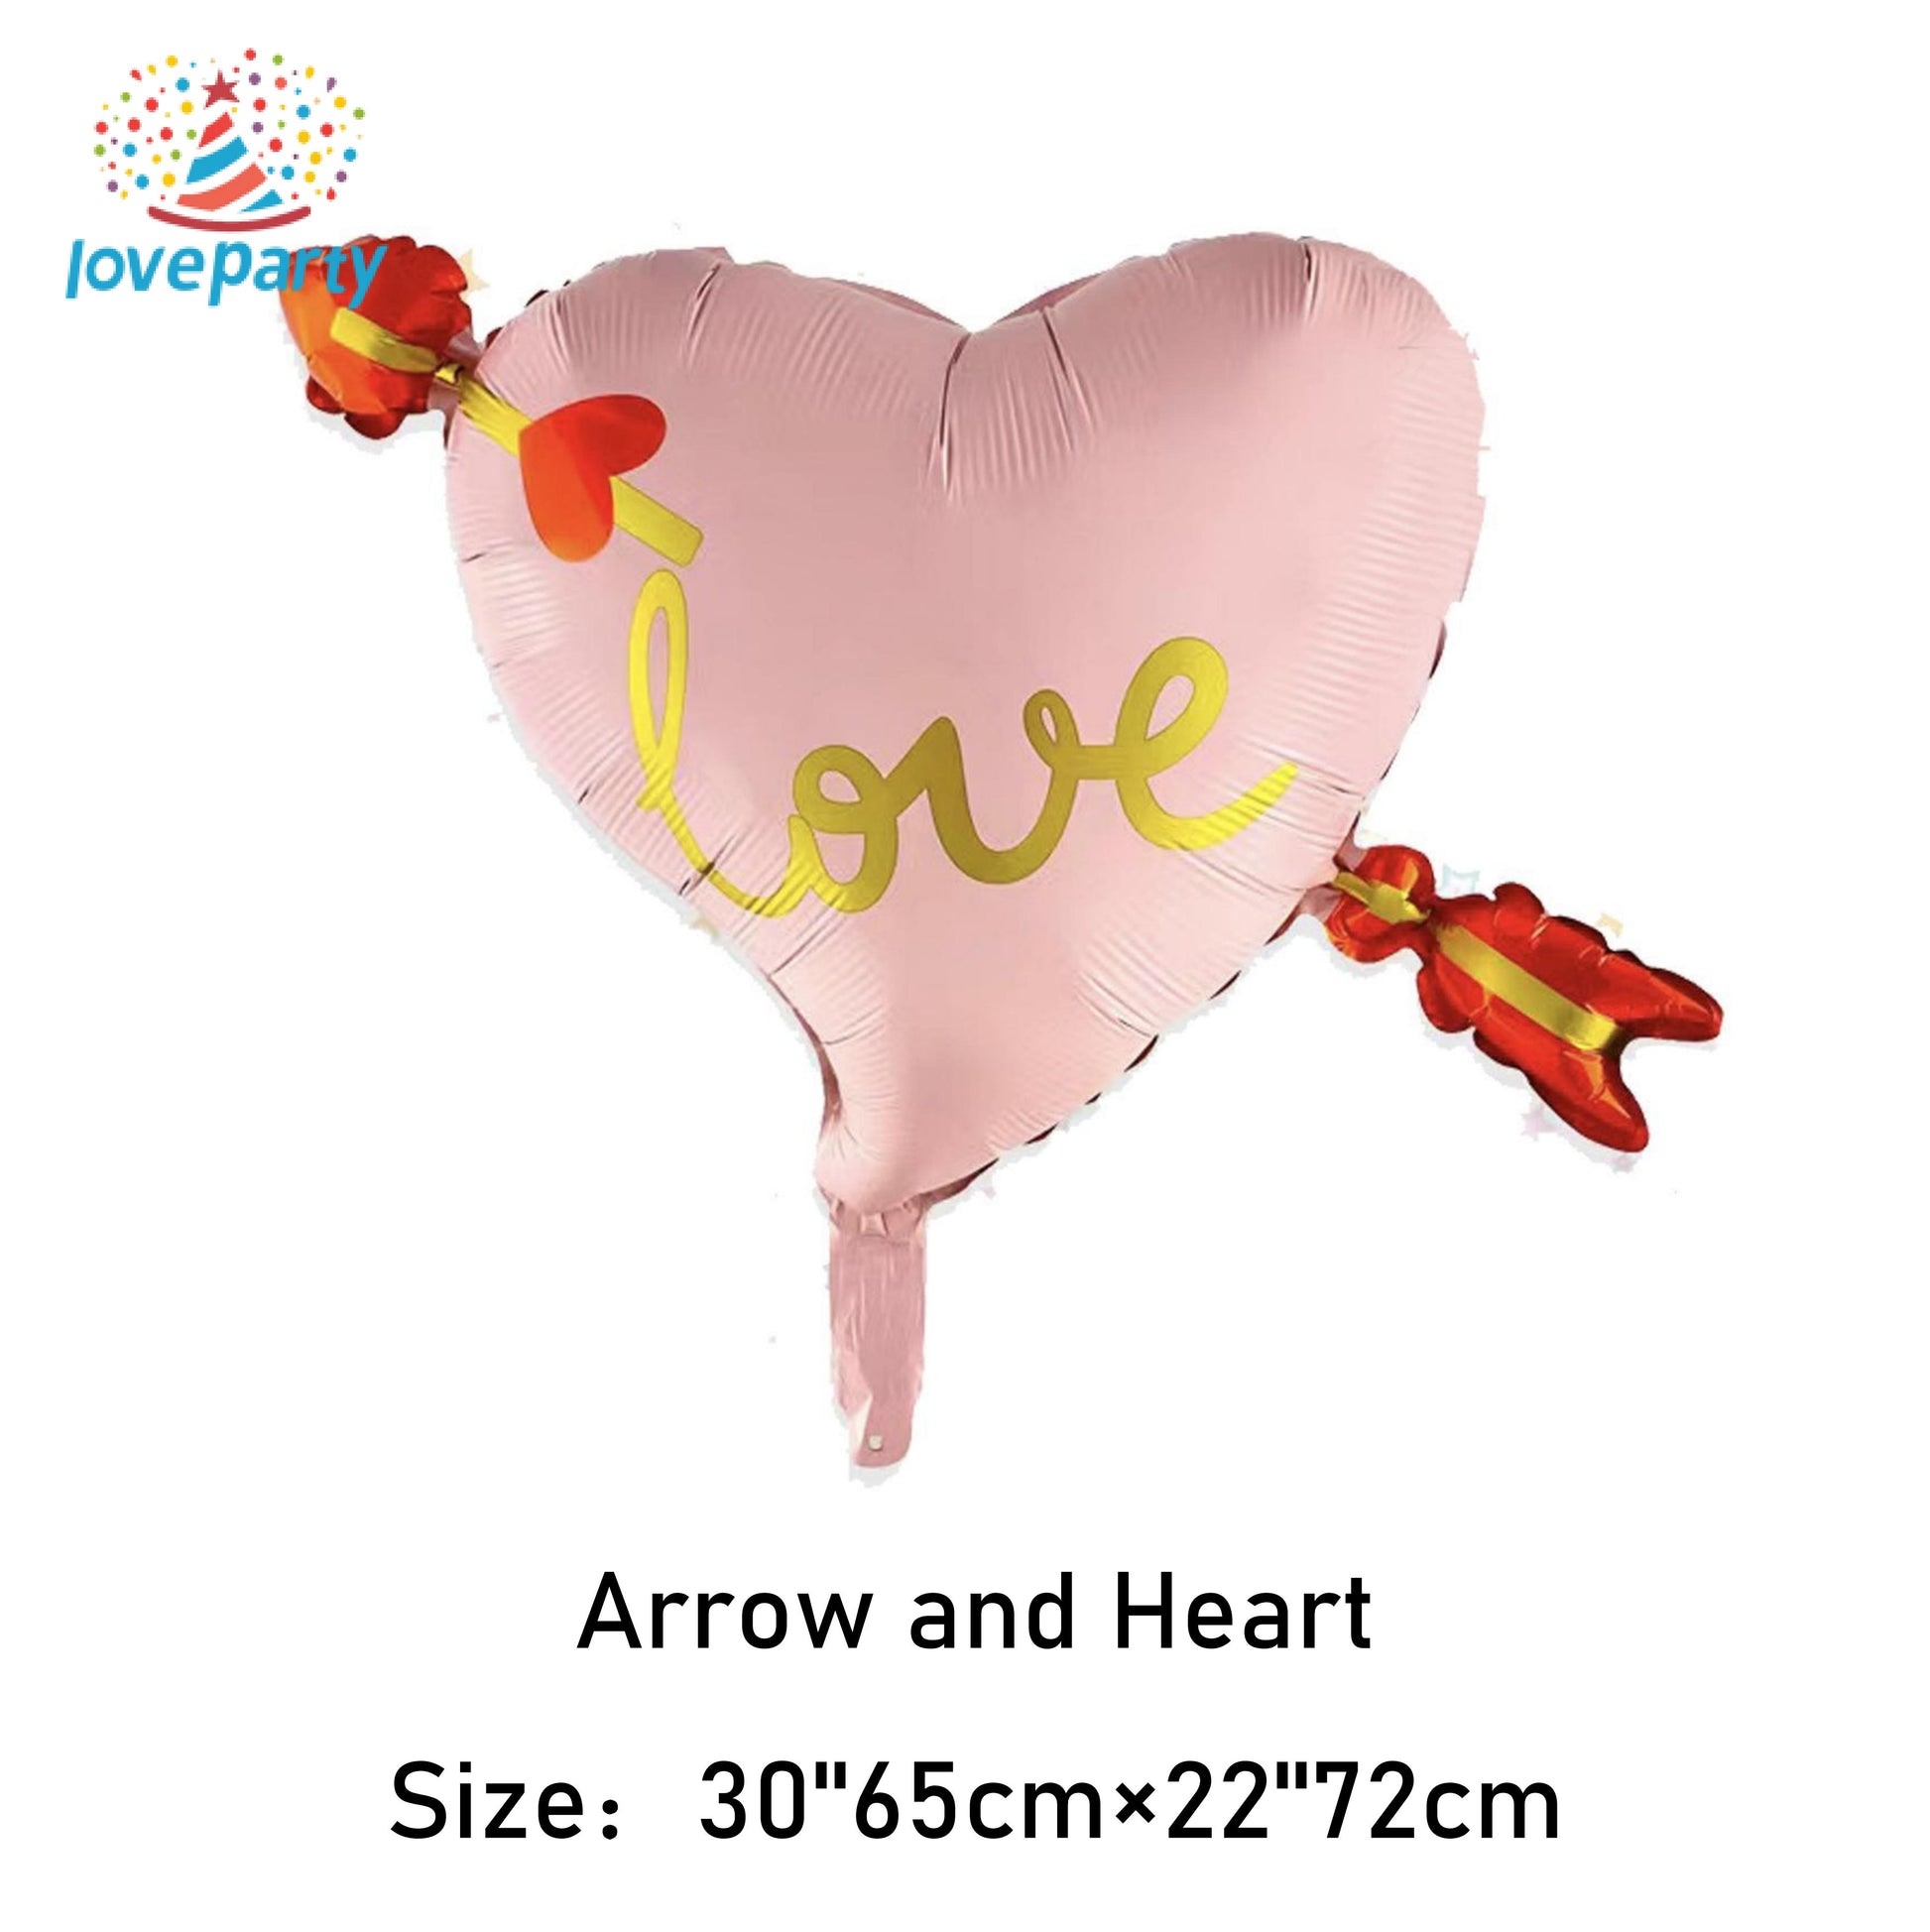 Cartoon Heart-shaped Party Decorations Aluminum Foil Balloons with Poodle Design and Creative Nordic Style for Weddings